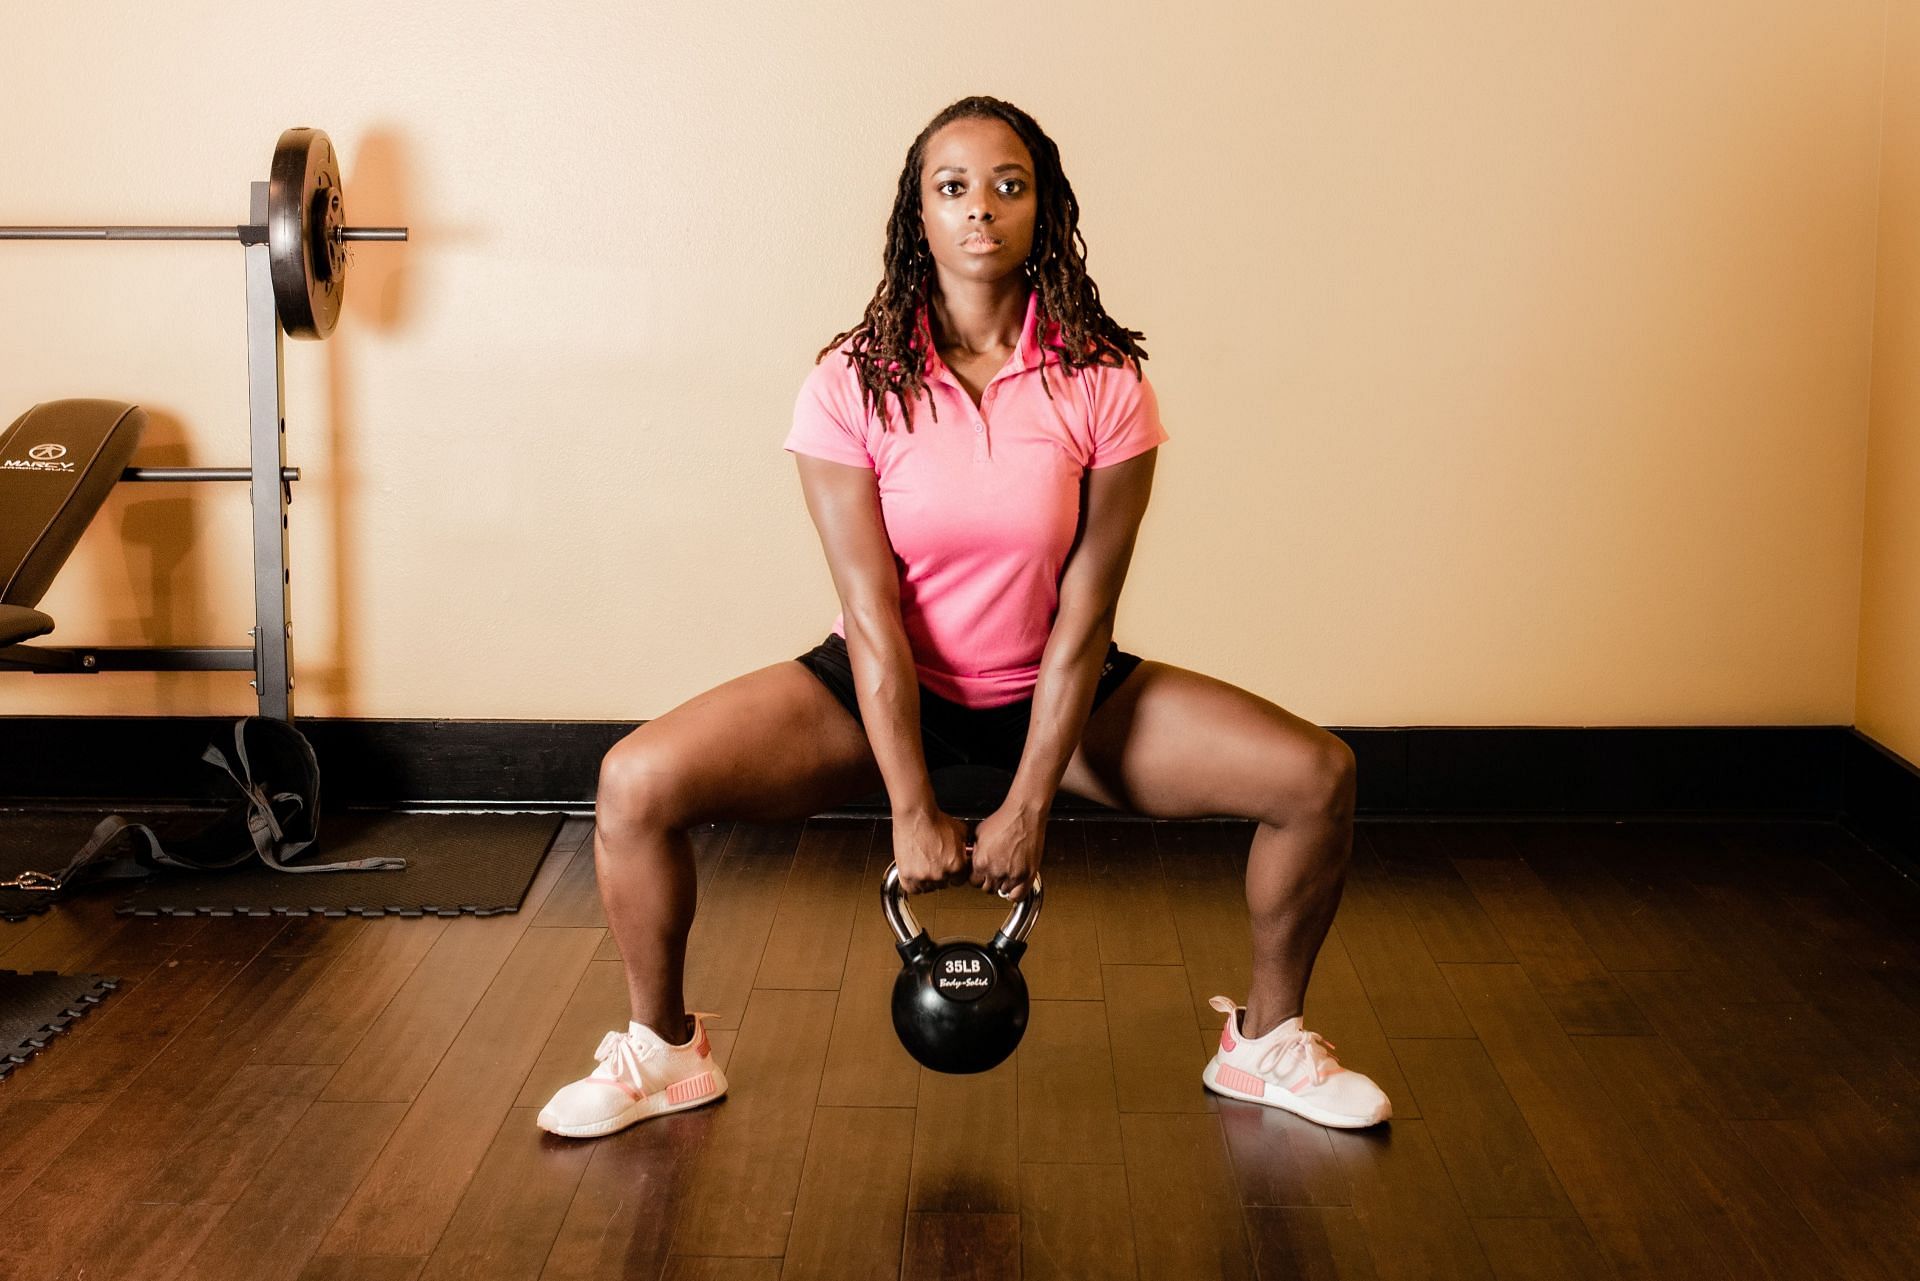 Sumo squats activate both the inner thighs and quads (Photo via Unsplash/Meagan Stone)